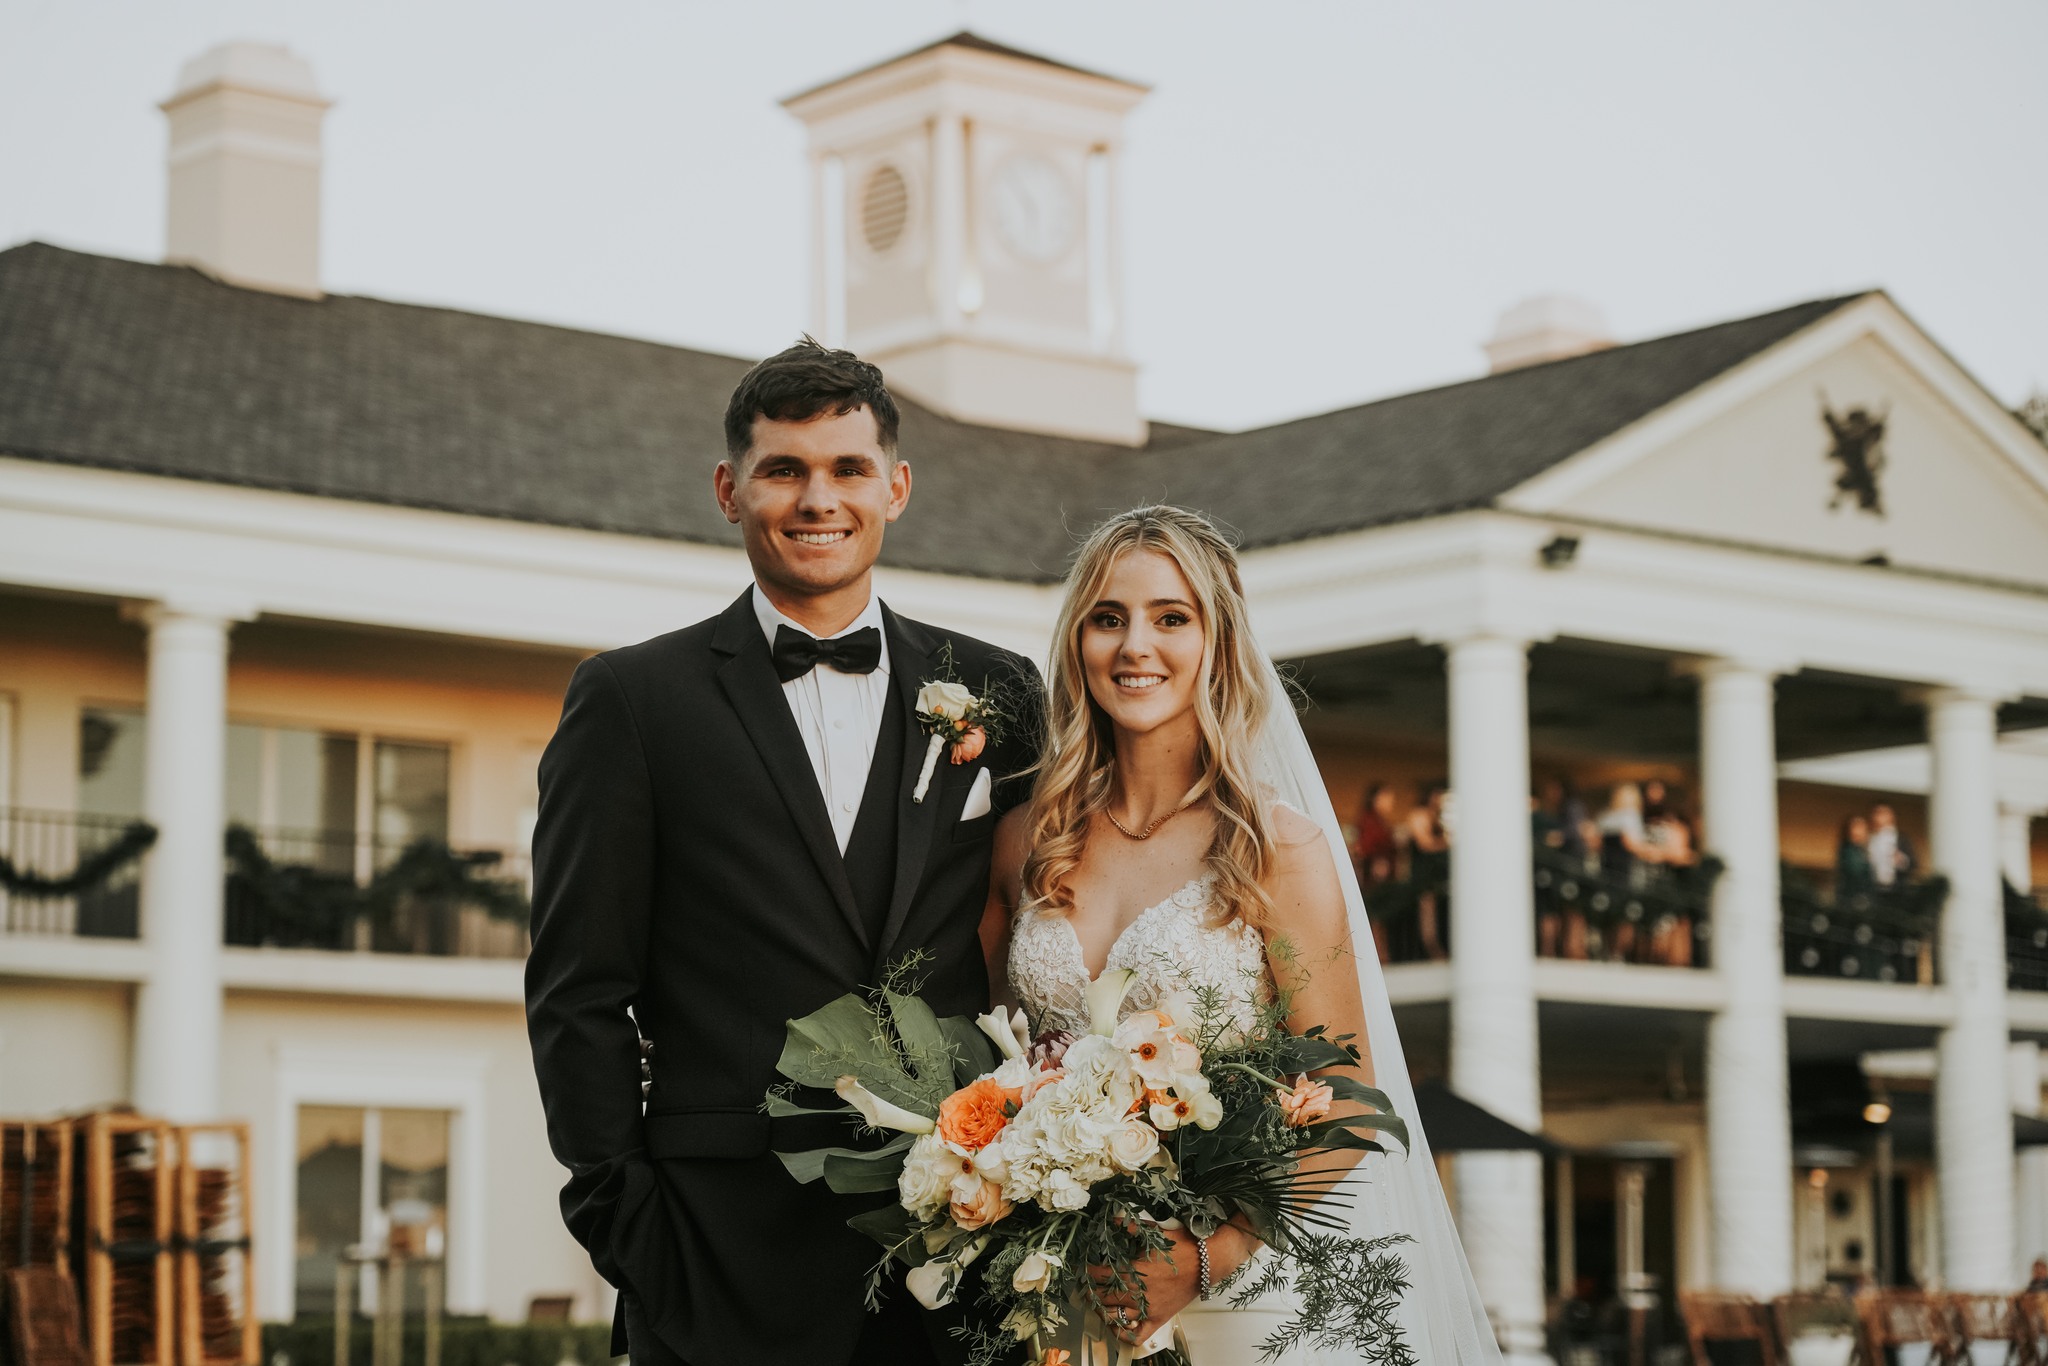 Cici and Sam's beautiful wedding at the Lake Nona Country Club